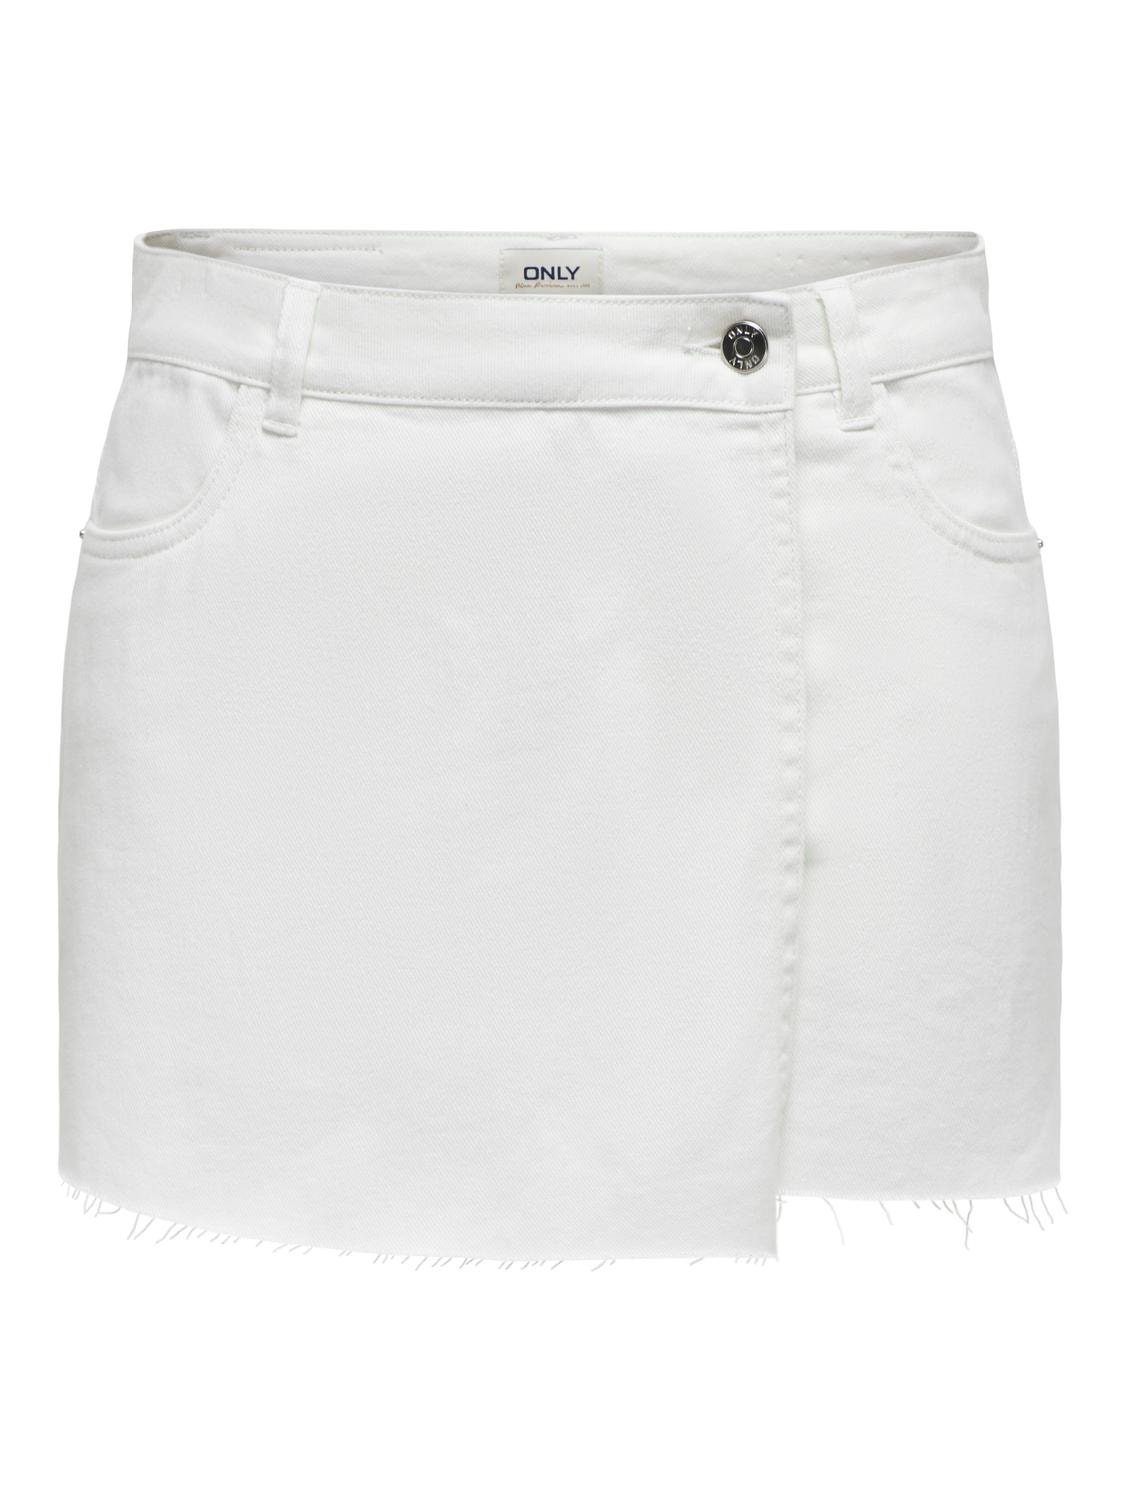 ONLY Jupe courte Taille moyenne -White - 15227220